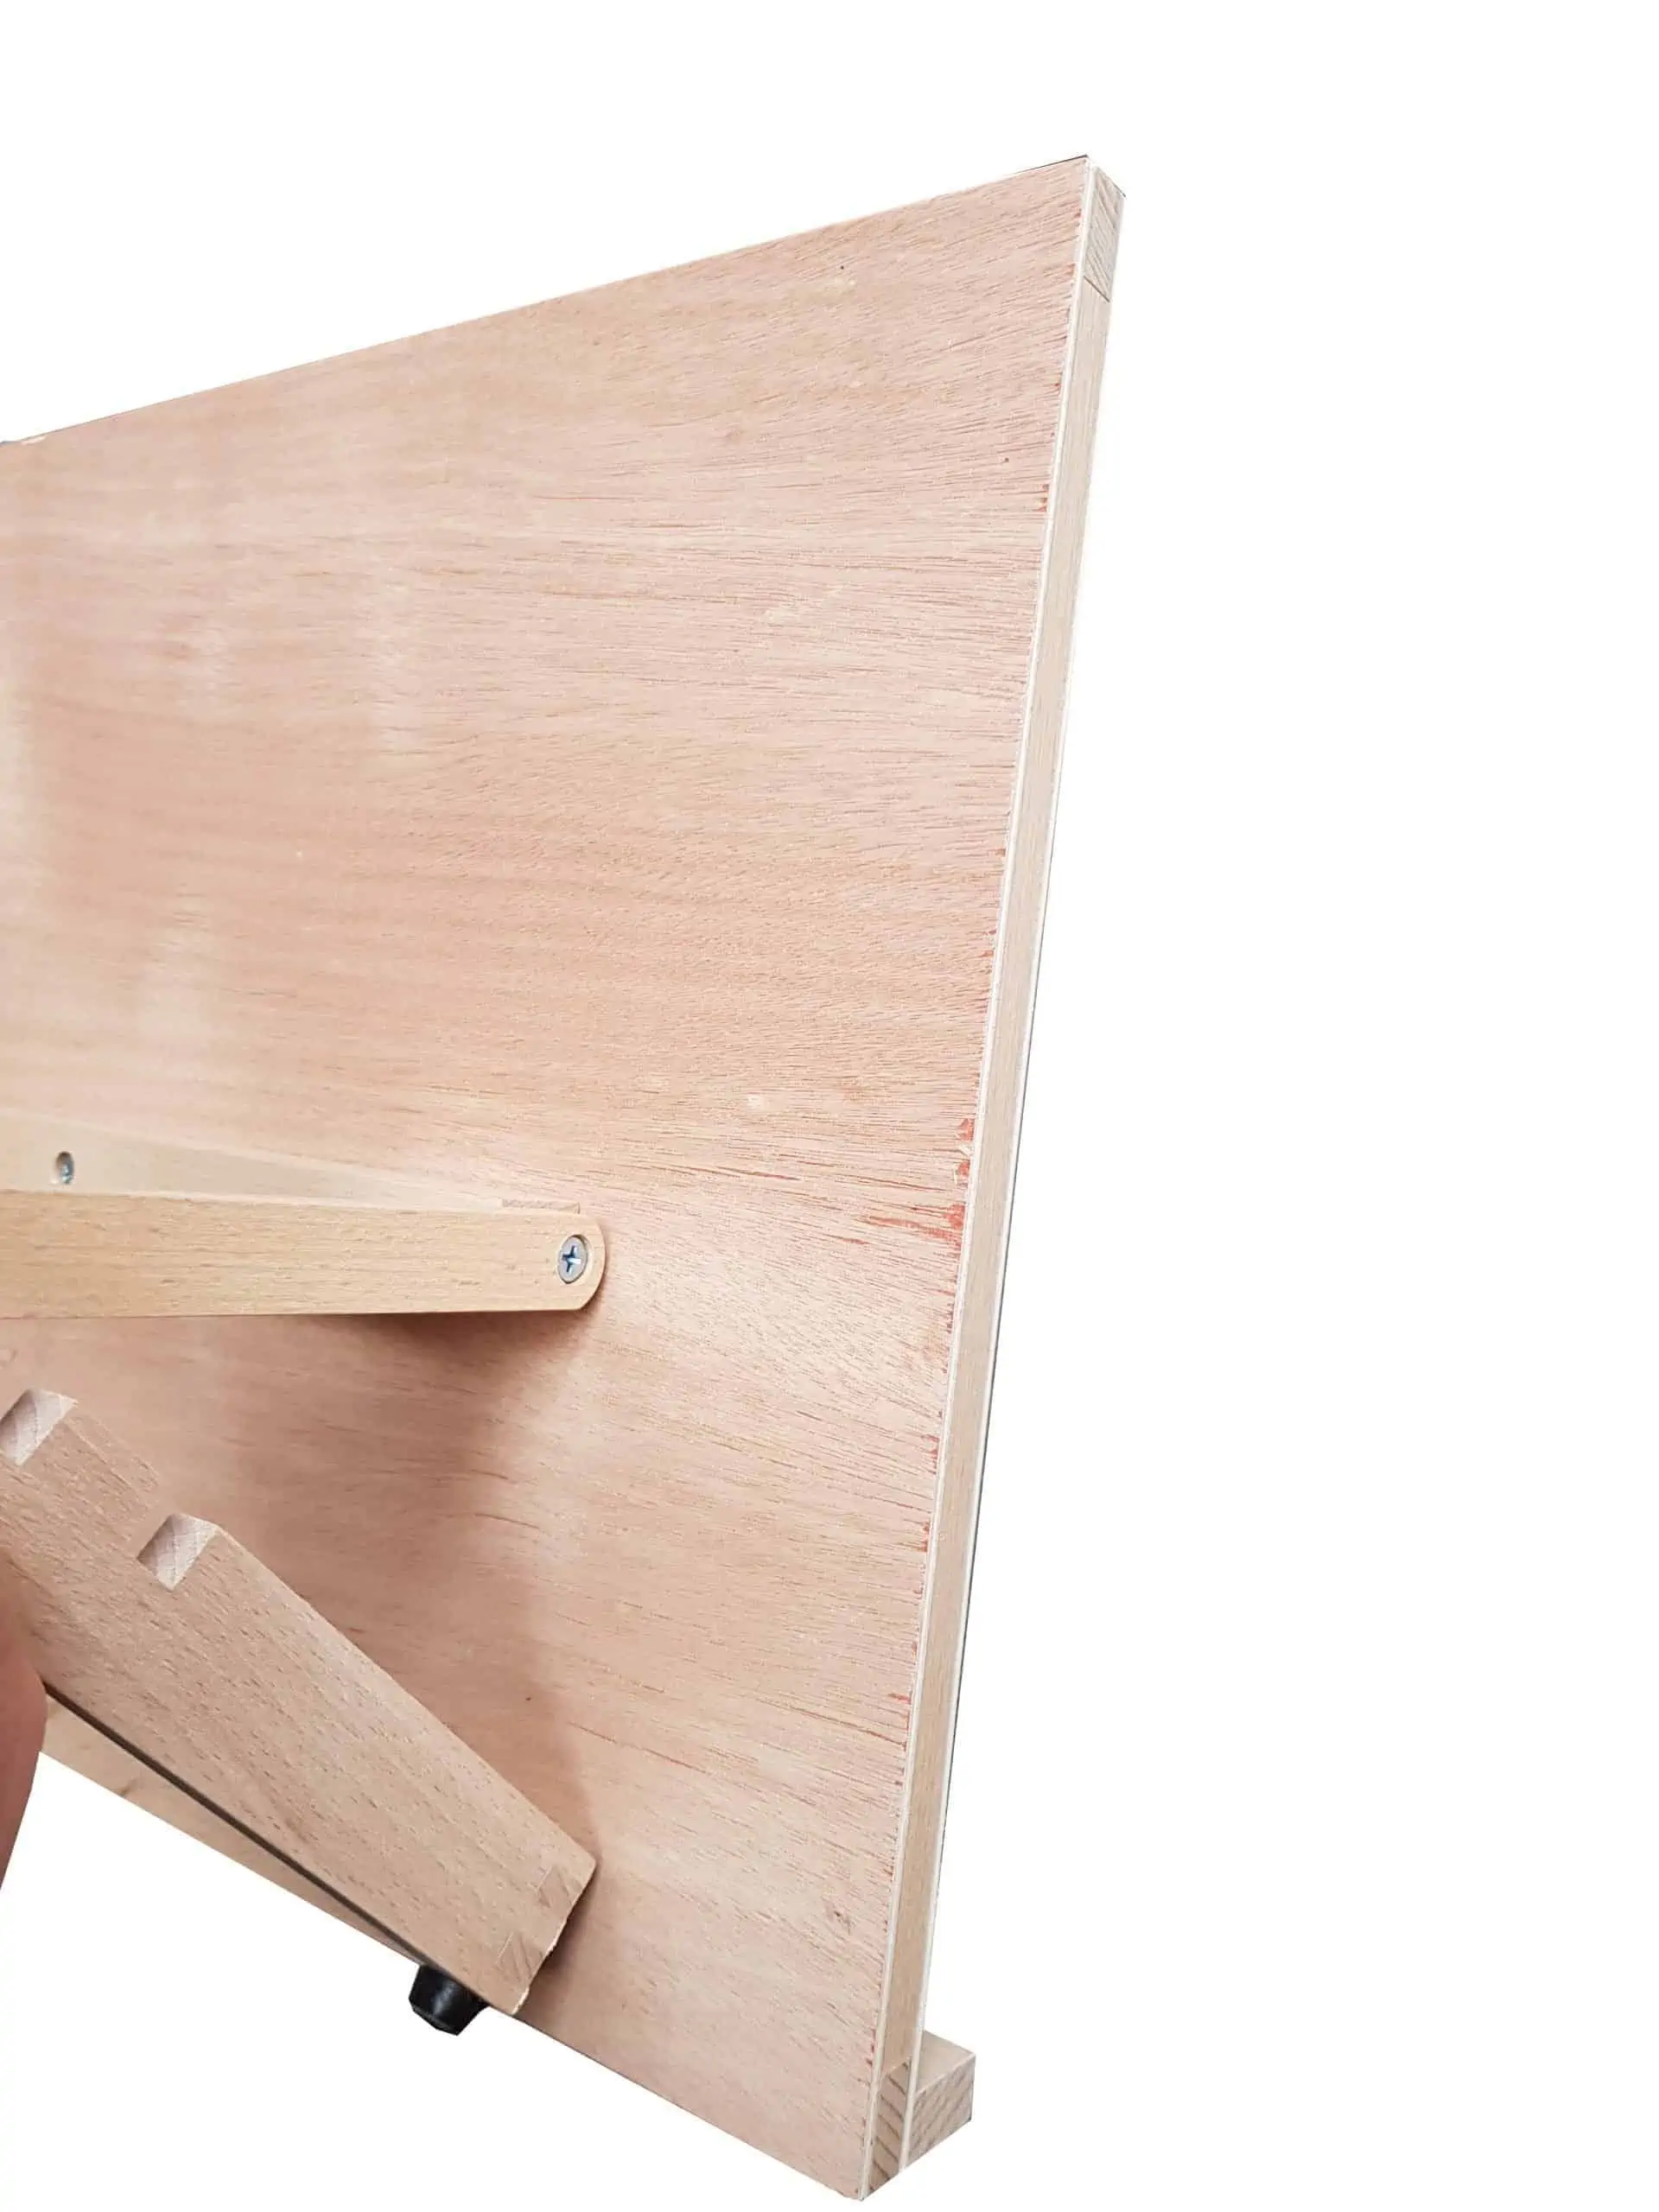 A2 Wooden Table Top / Desk Easel With 5 Adjustable Angles - By Zieler